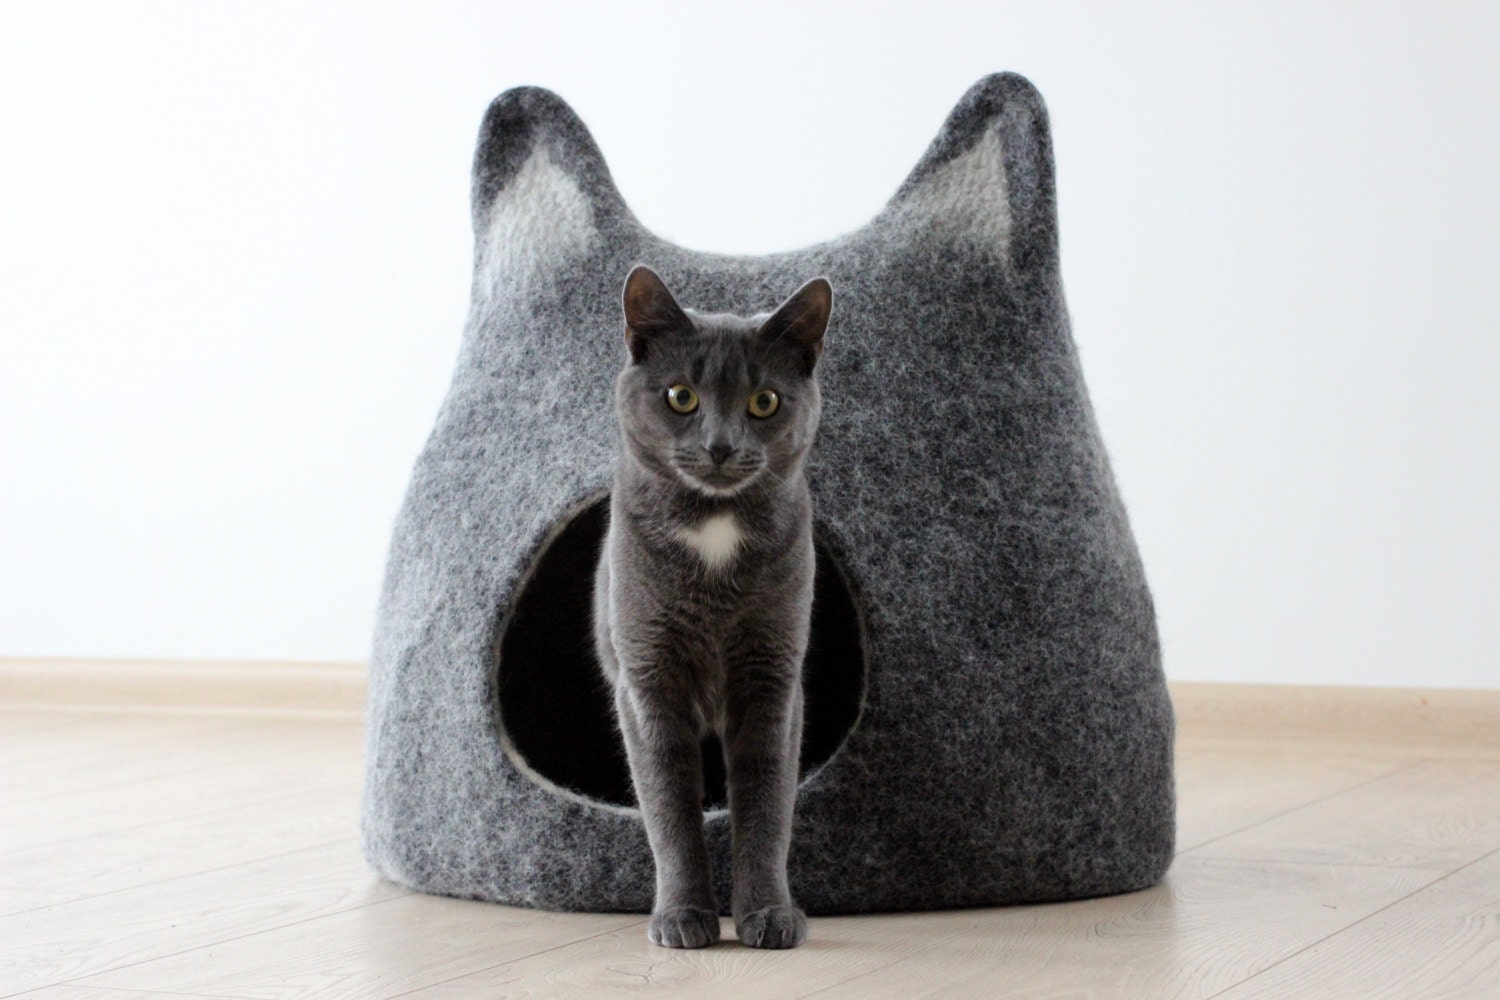  Cat  bed cat cave  cat  house handmade felted wool by AgnesFelt